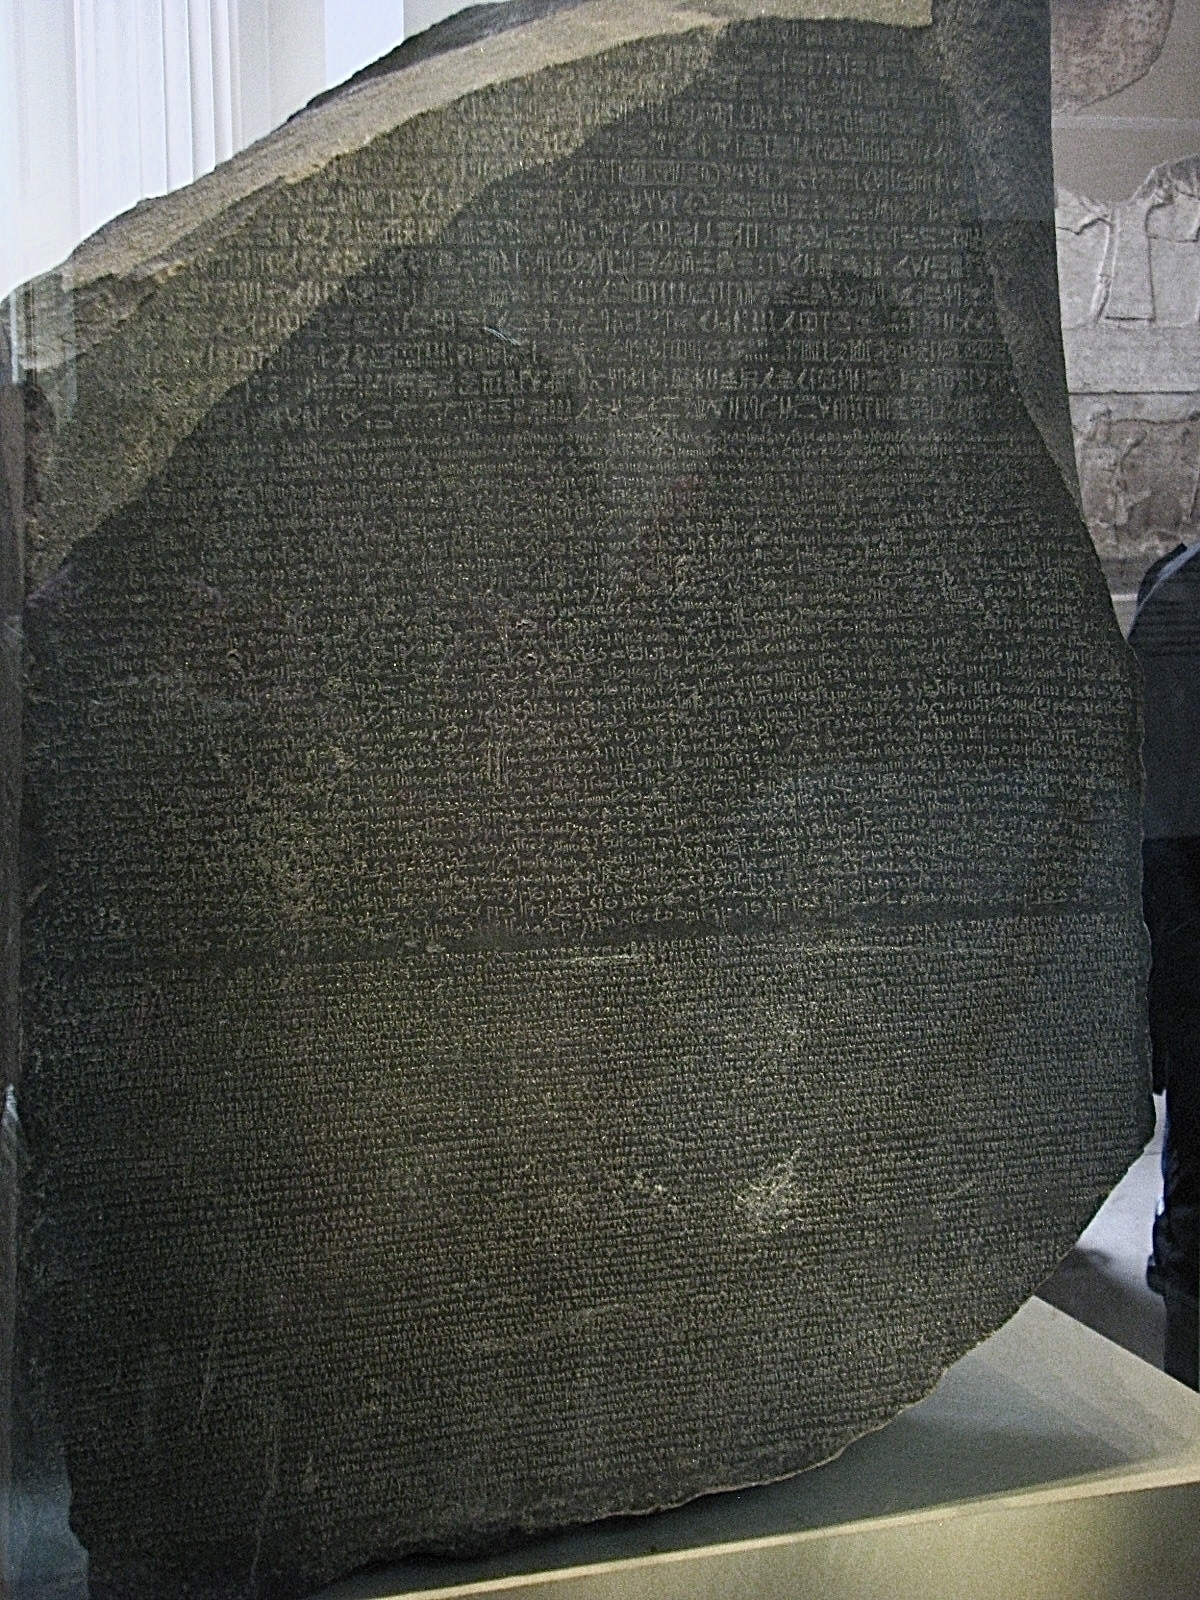 A large black stone with a smooth front surface but rough edges where it’s been broken. There are three different languages carved on the stone. It’s inside a glass case and the reflections of people viewing it are visible in the glass.